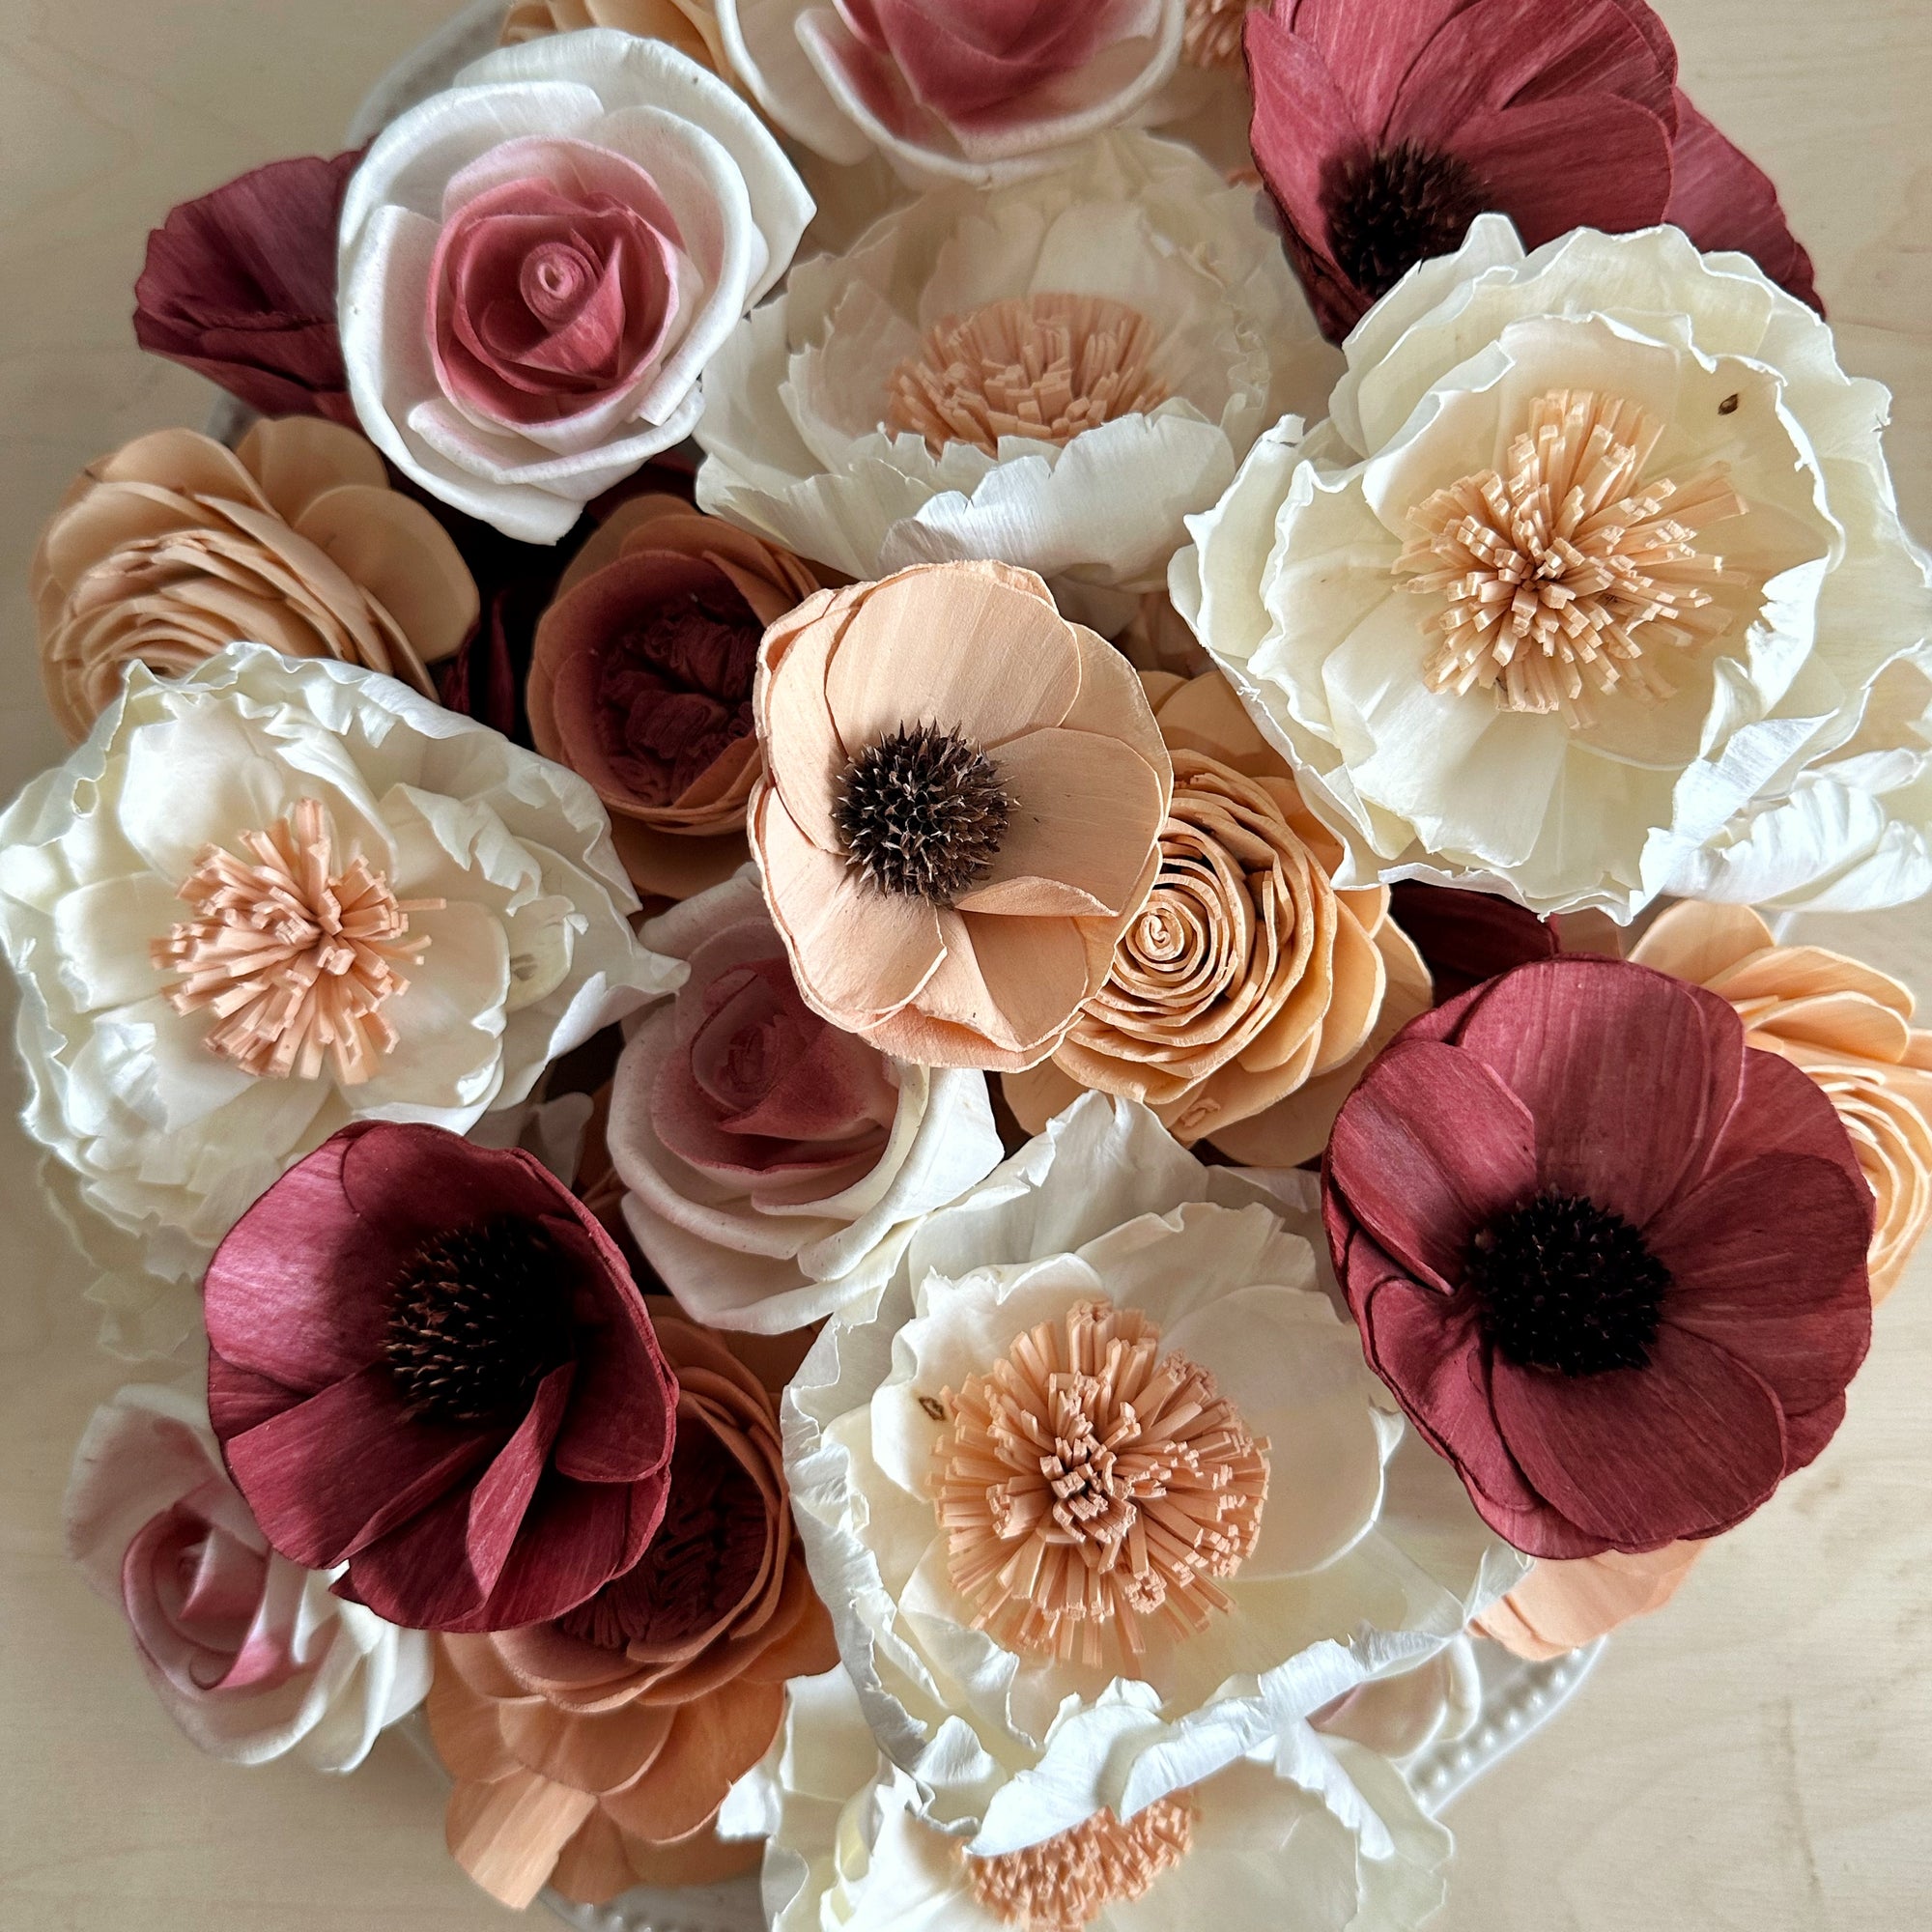 Old Fashion Love- dyed sola wood flower assortment